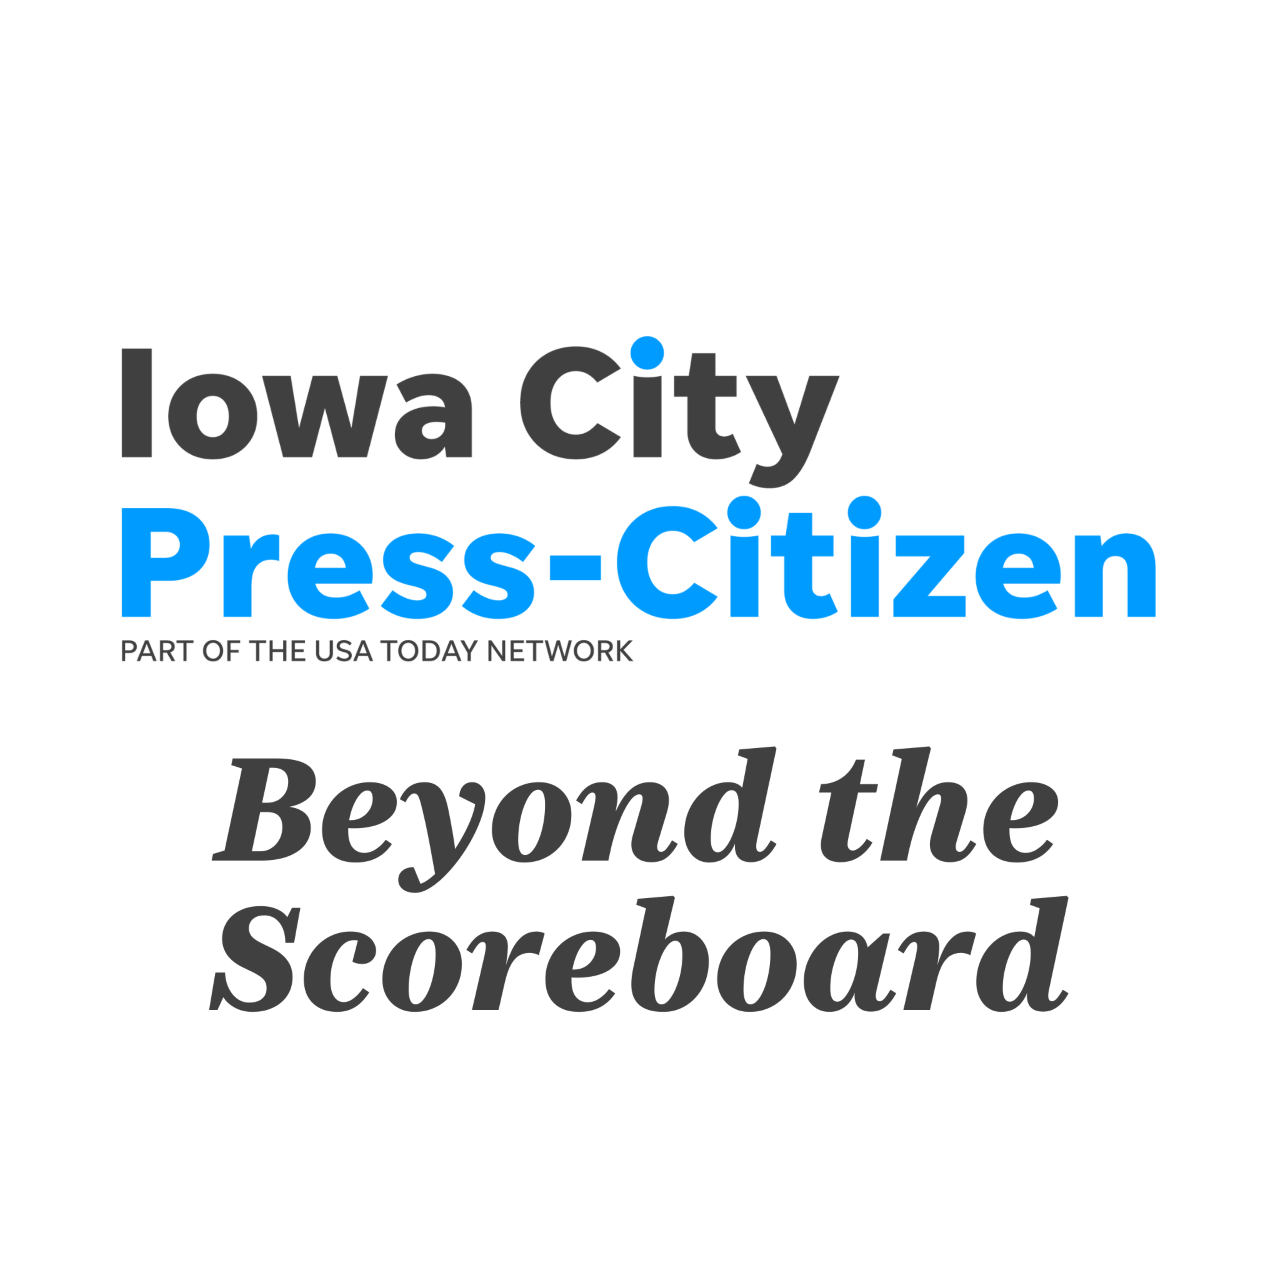 Beyond the Scoreboard: from the Iowa City Press-Citizen clips 